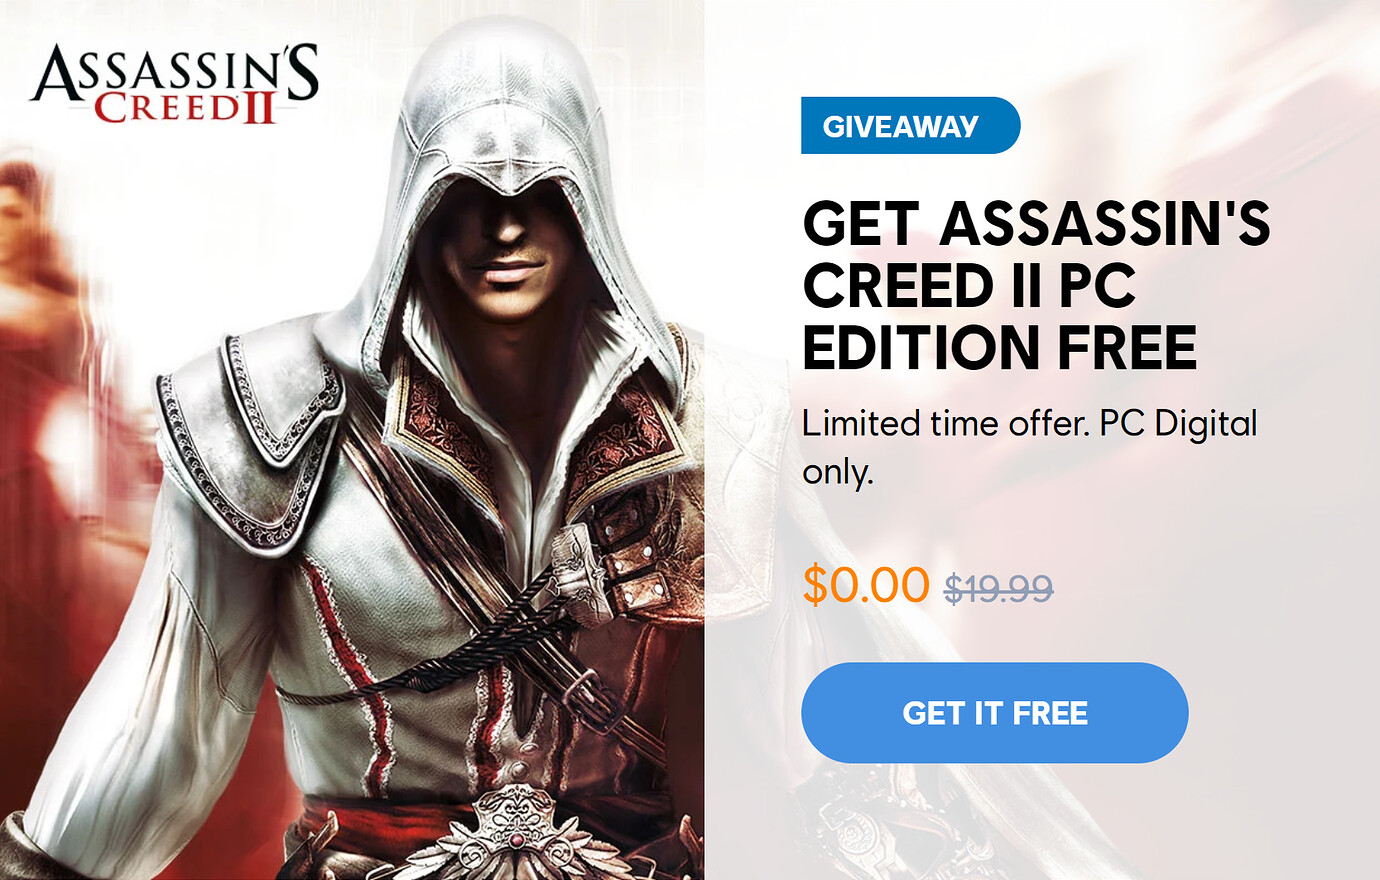 Assasin Screed 2 Deluxe. Assassins Creed 2 Deluxe Edition. Assassin's Creed 2 Делюкс эдишн лого. Assassin's Creed диск ПК Аклла лицензия.